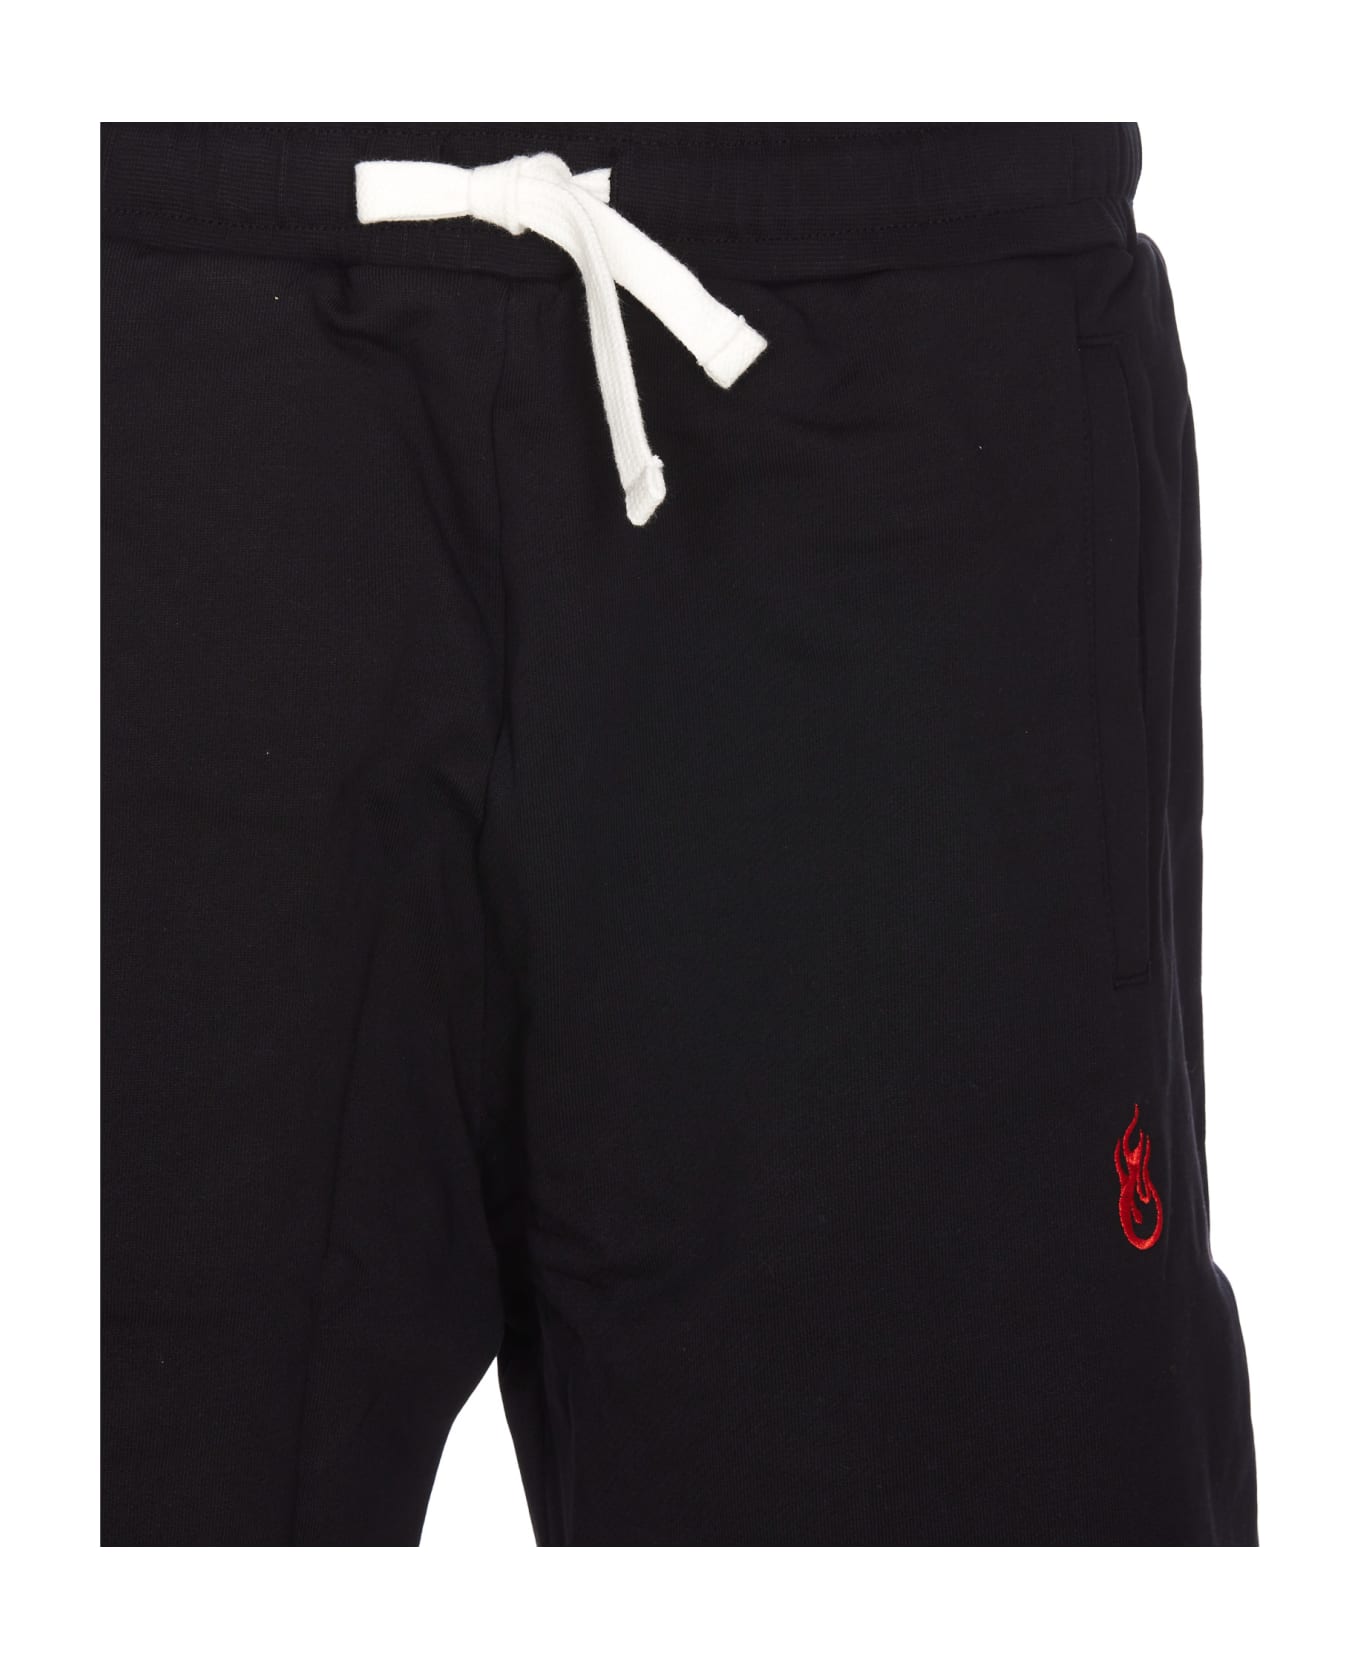 Vision of Super Shorts With Flames Logo - Black ショートパンツ